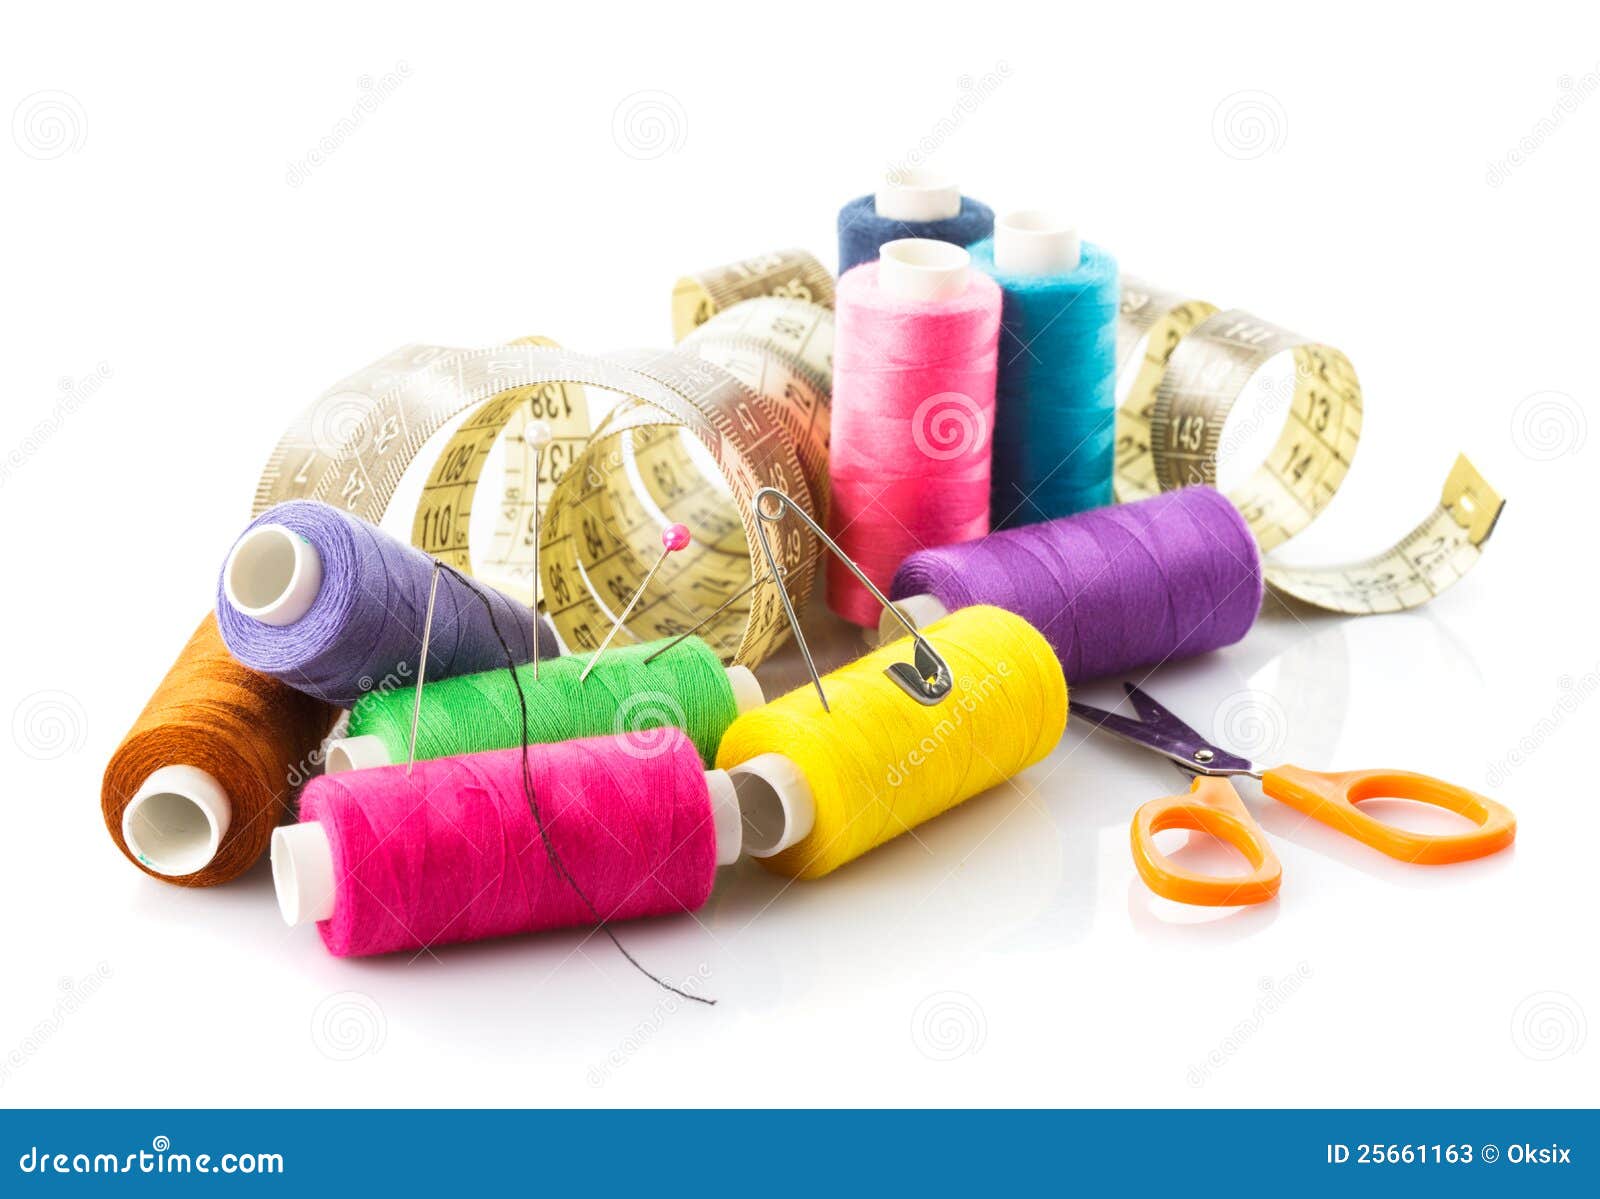 Sewing items stock image. Image of silk, tailor, green - 25661163